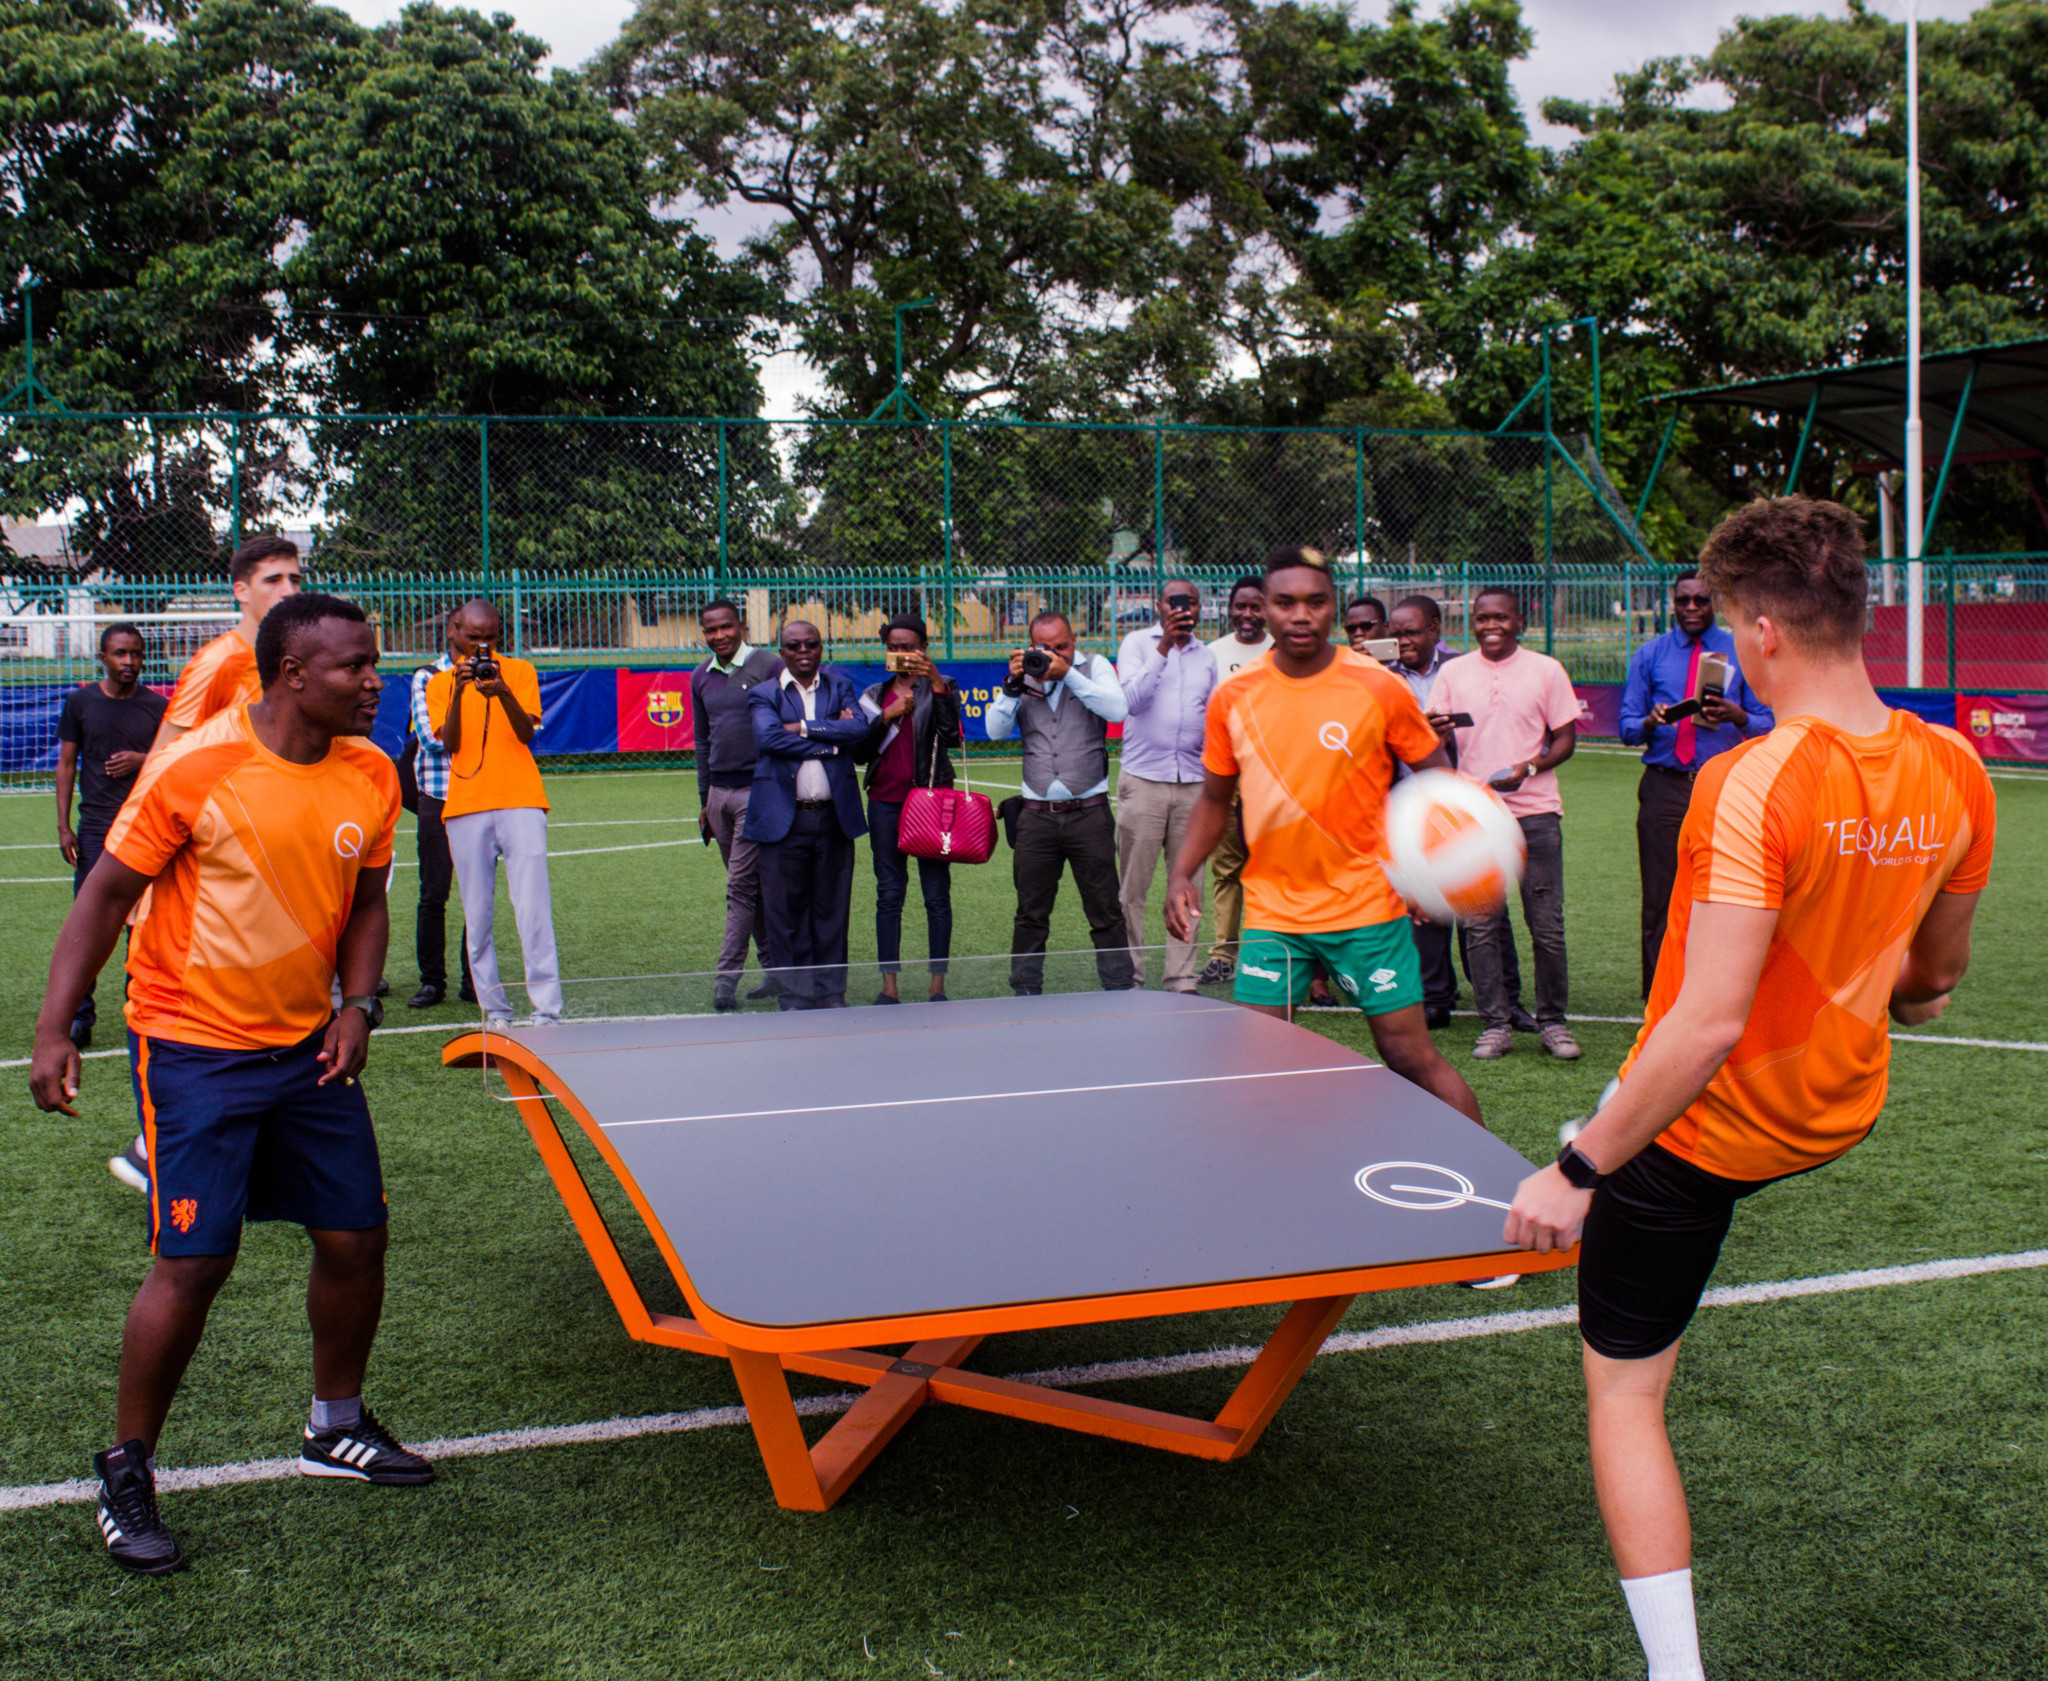 A demonstration of teqball took place at the launch event ©TFZ